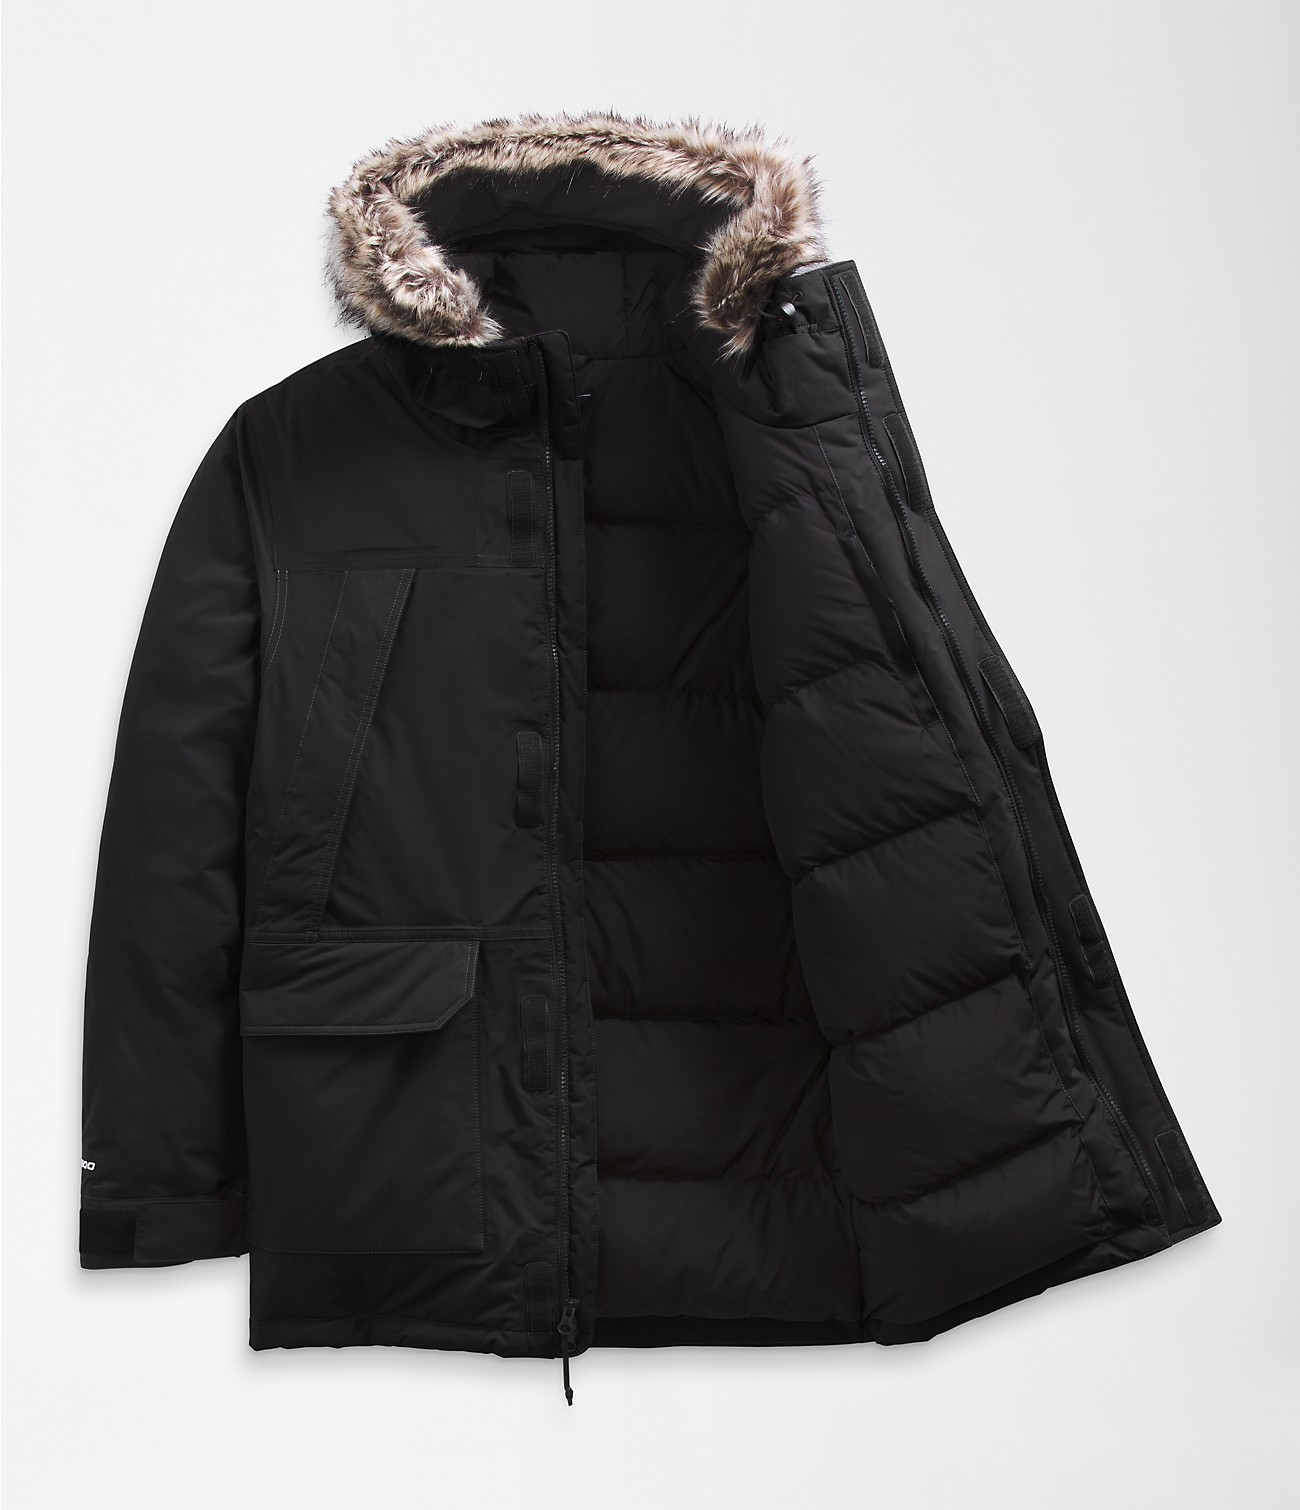 Unlock Wilderness' choice in the Stone Island Vs North Face comparison, the McMurdo Parka by The North Face